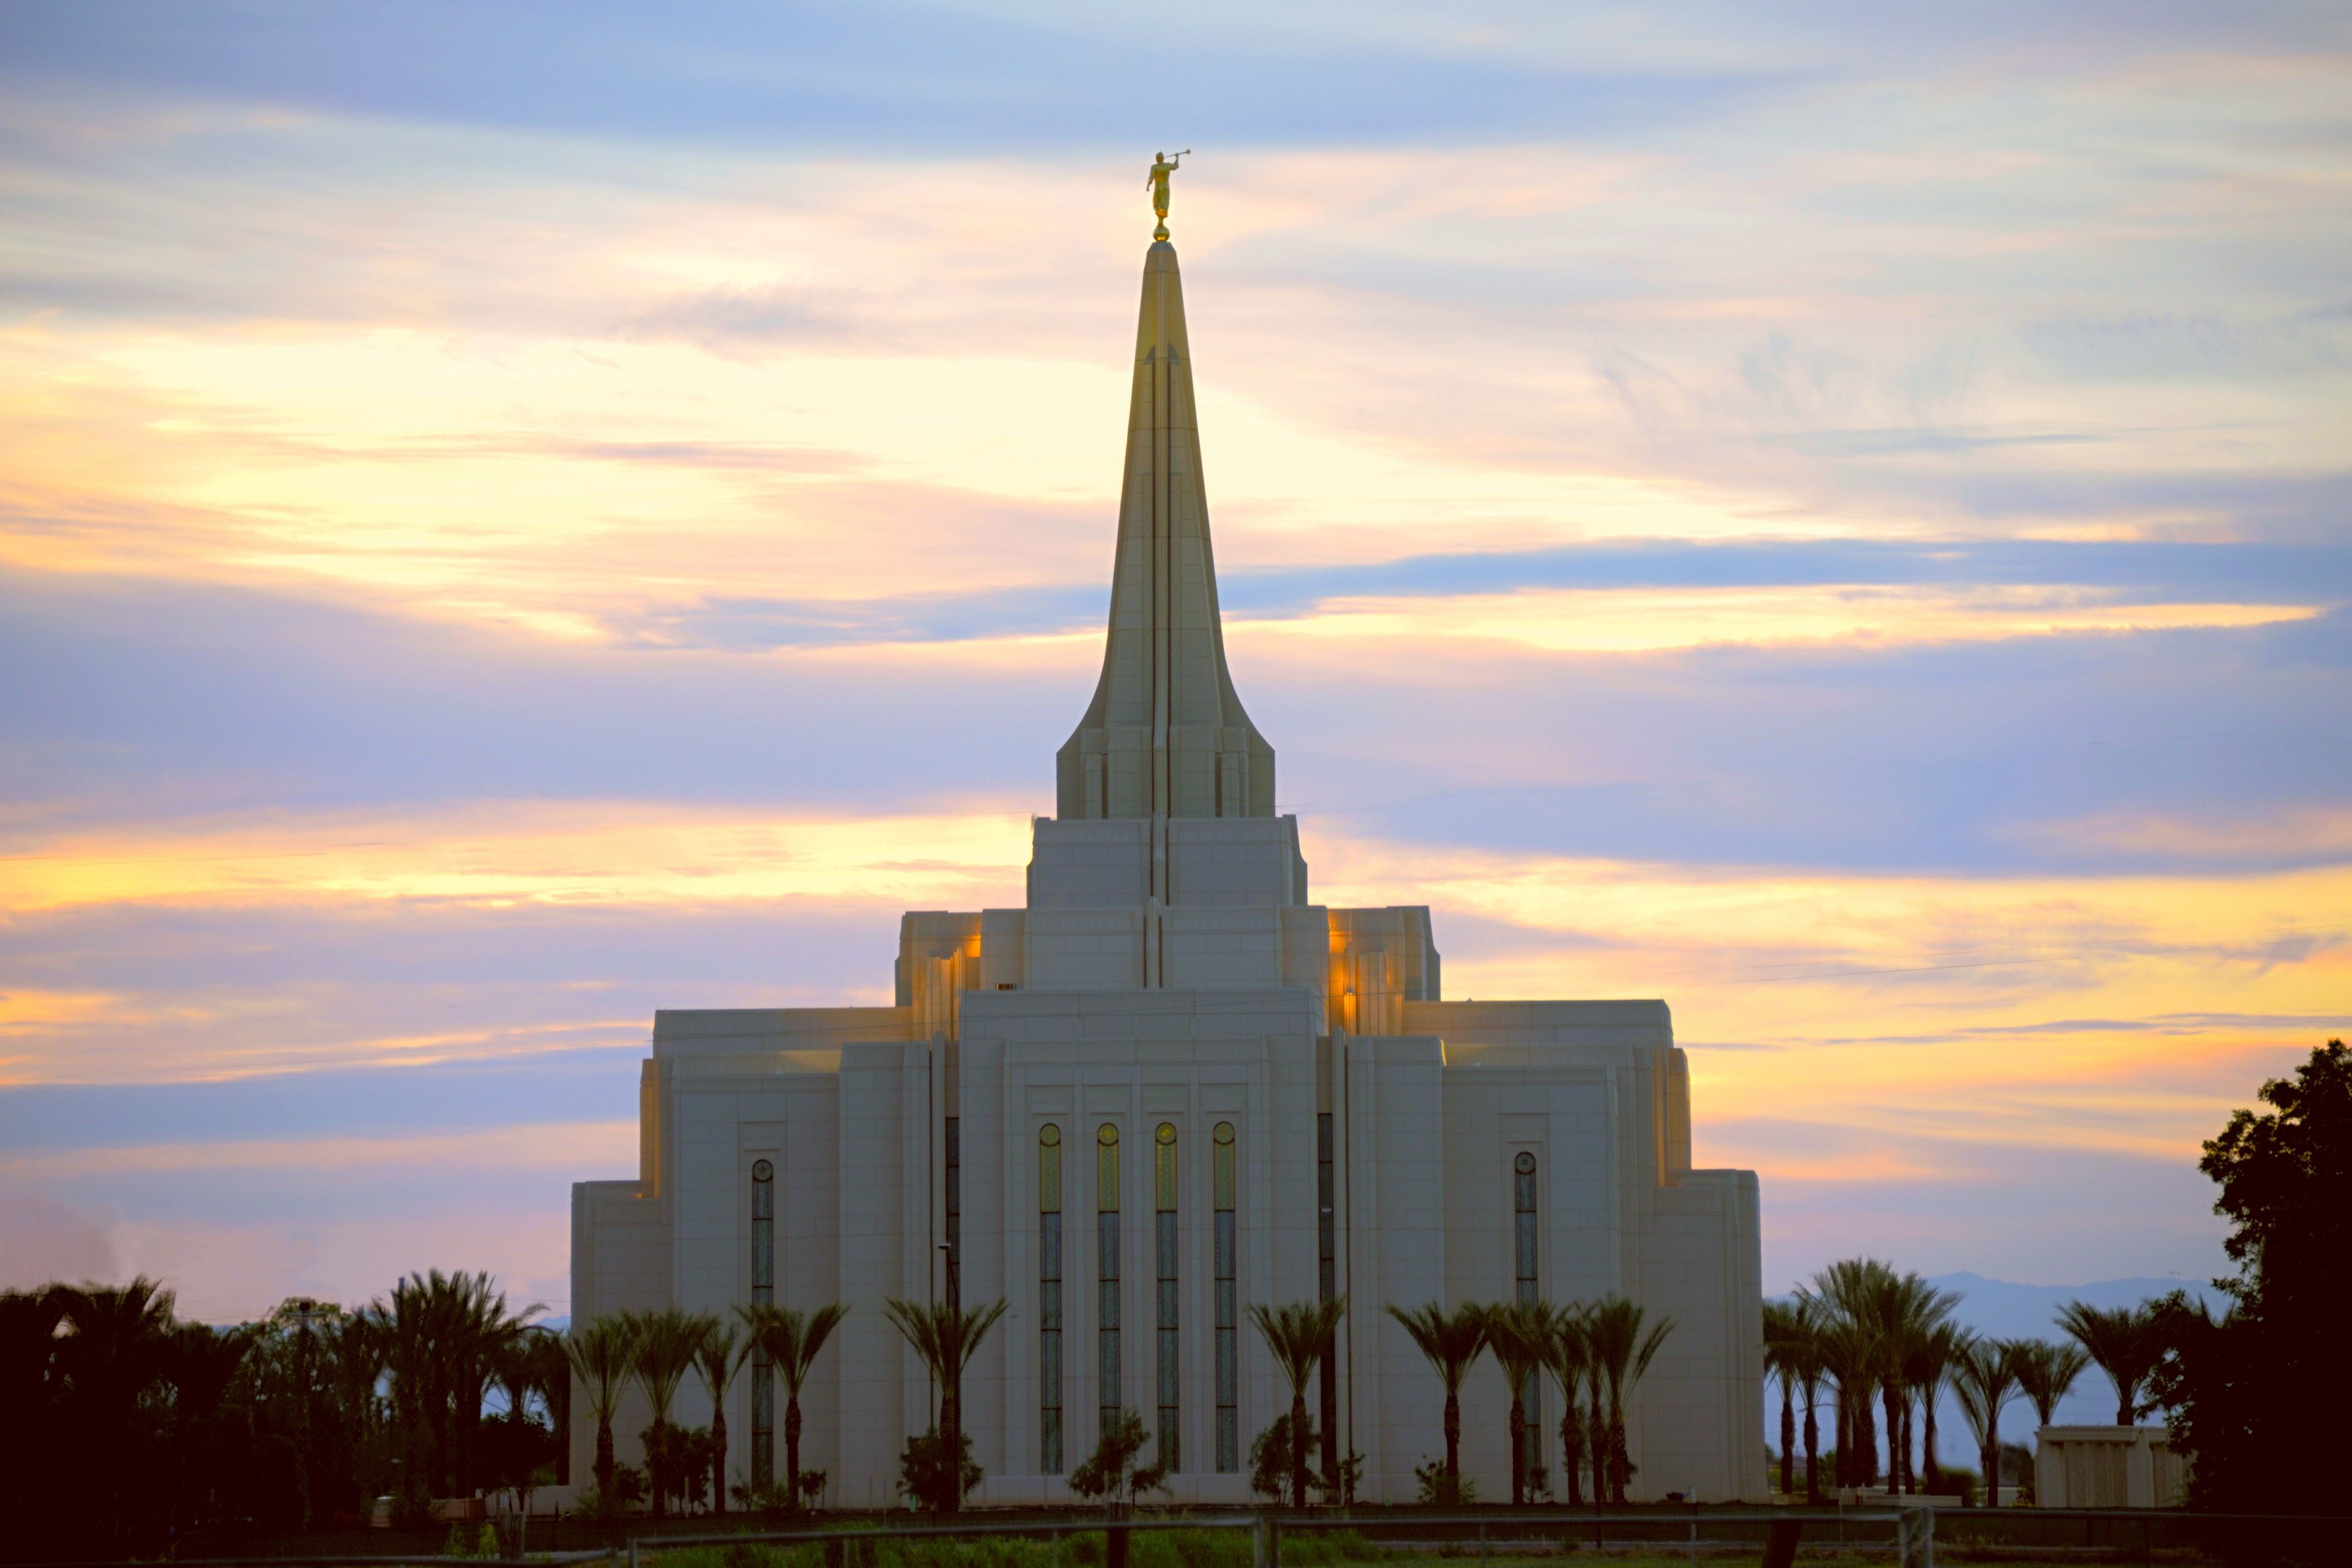 A landscape view of the Gilbert Arizona Temple at sunset.